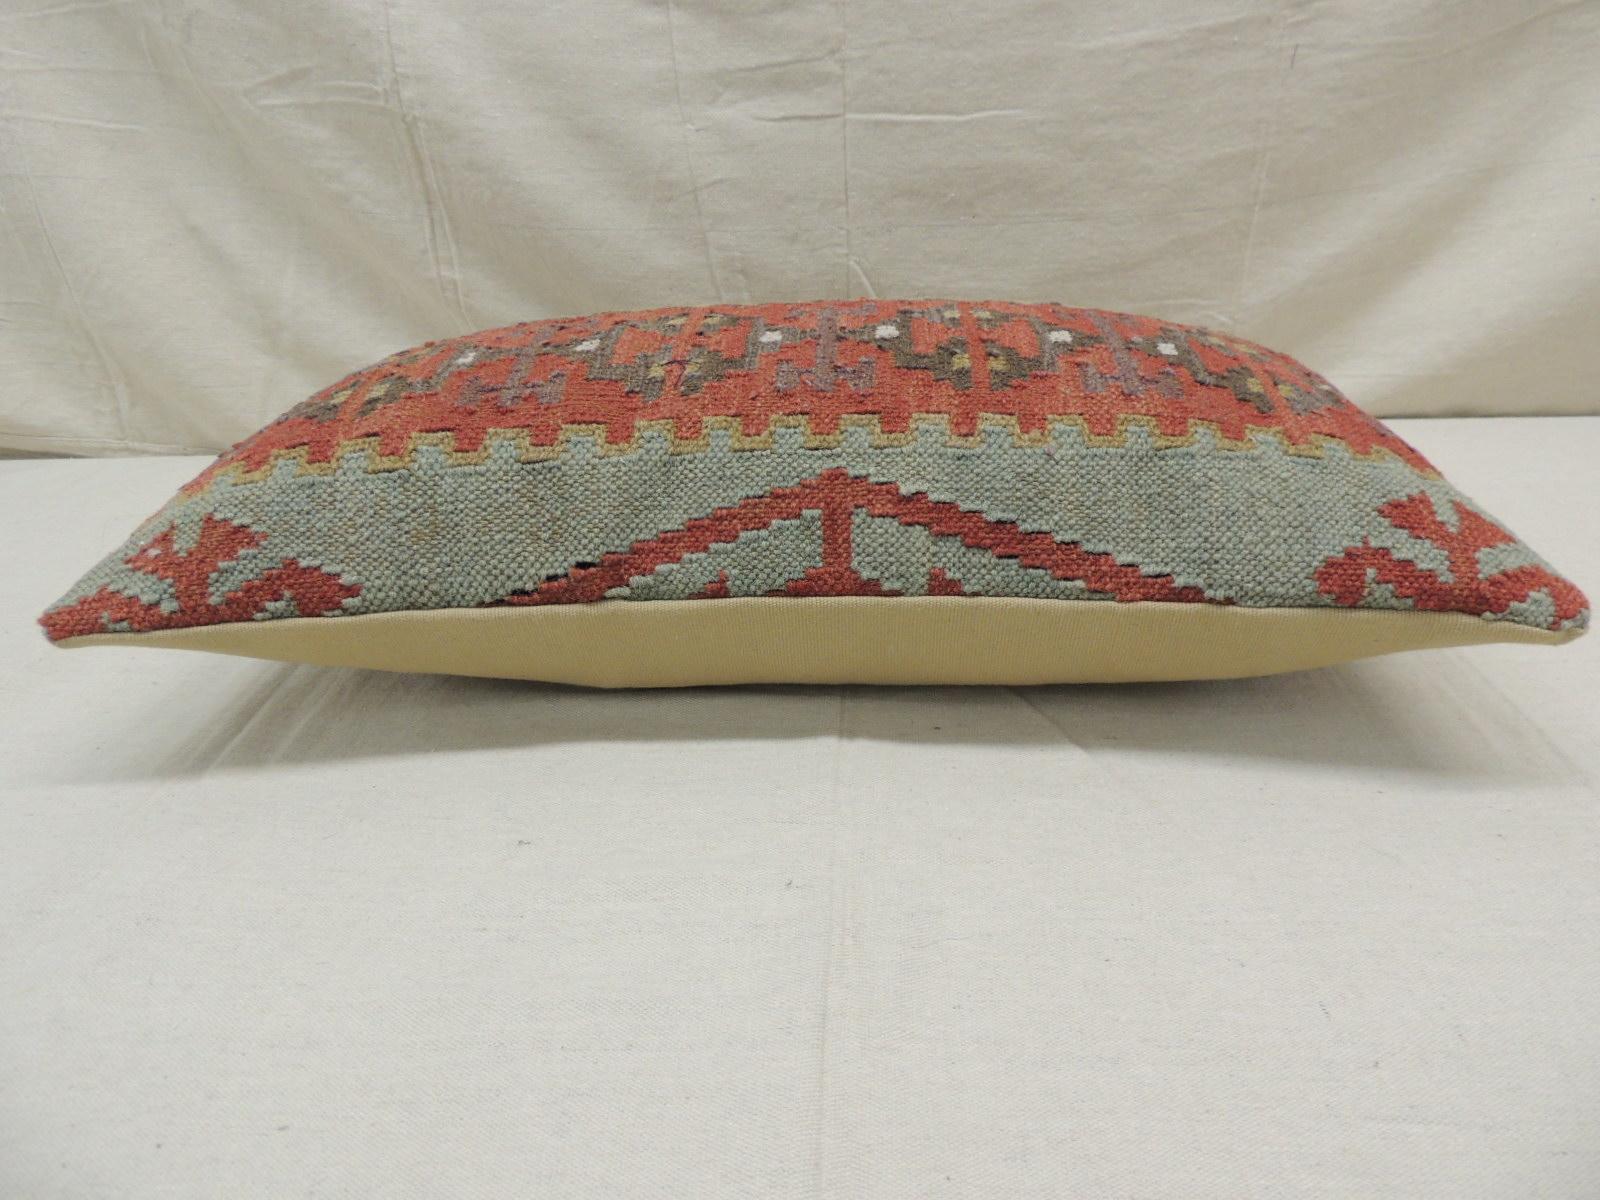 Machine-Made Rust and Blue Woven Kilim Decorative Bolster Pillow